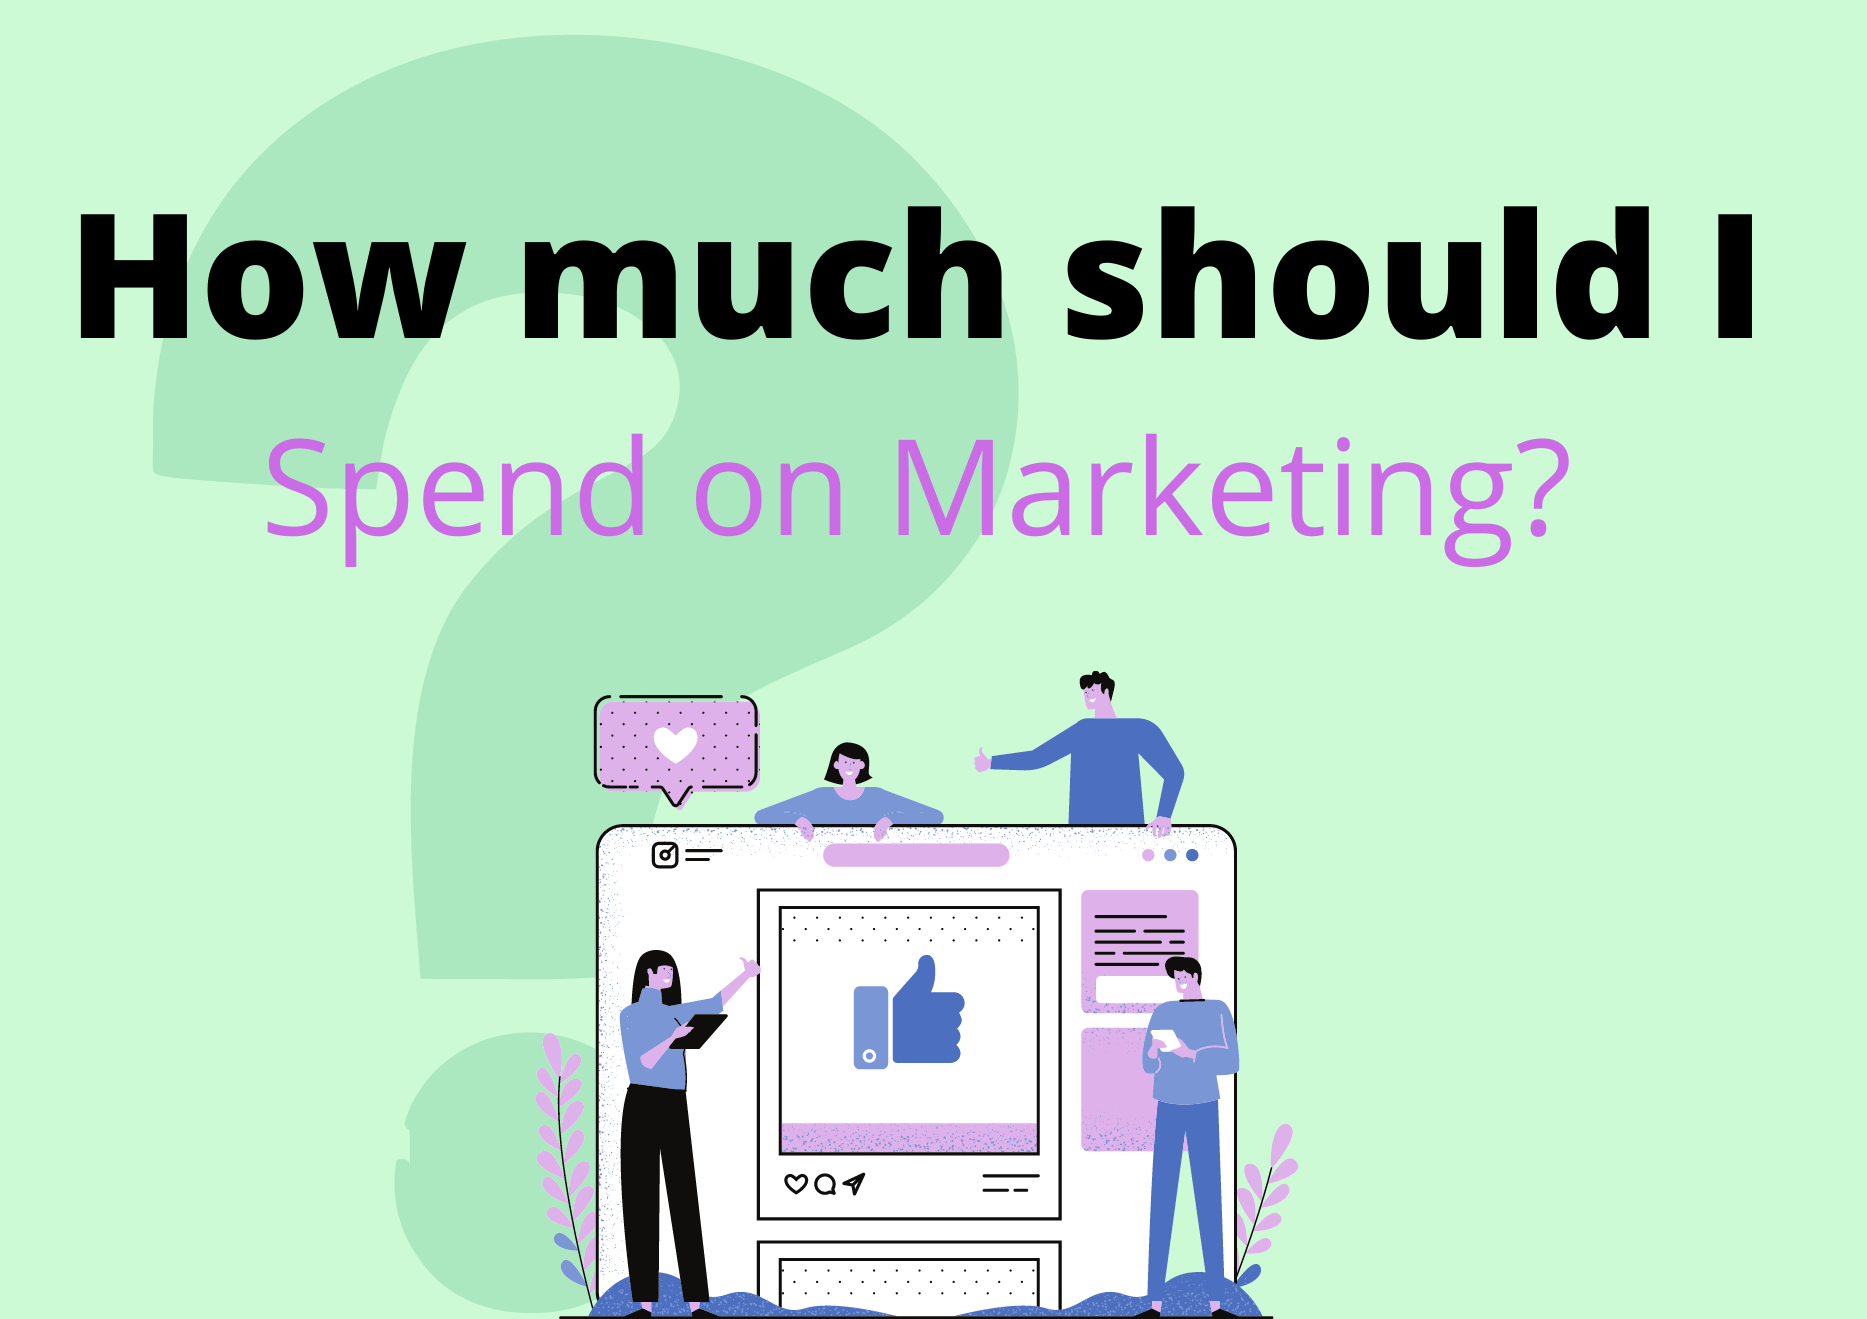 How much should I spend on marketing